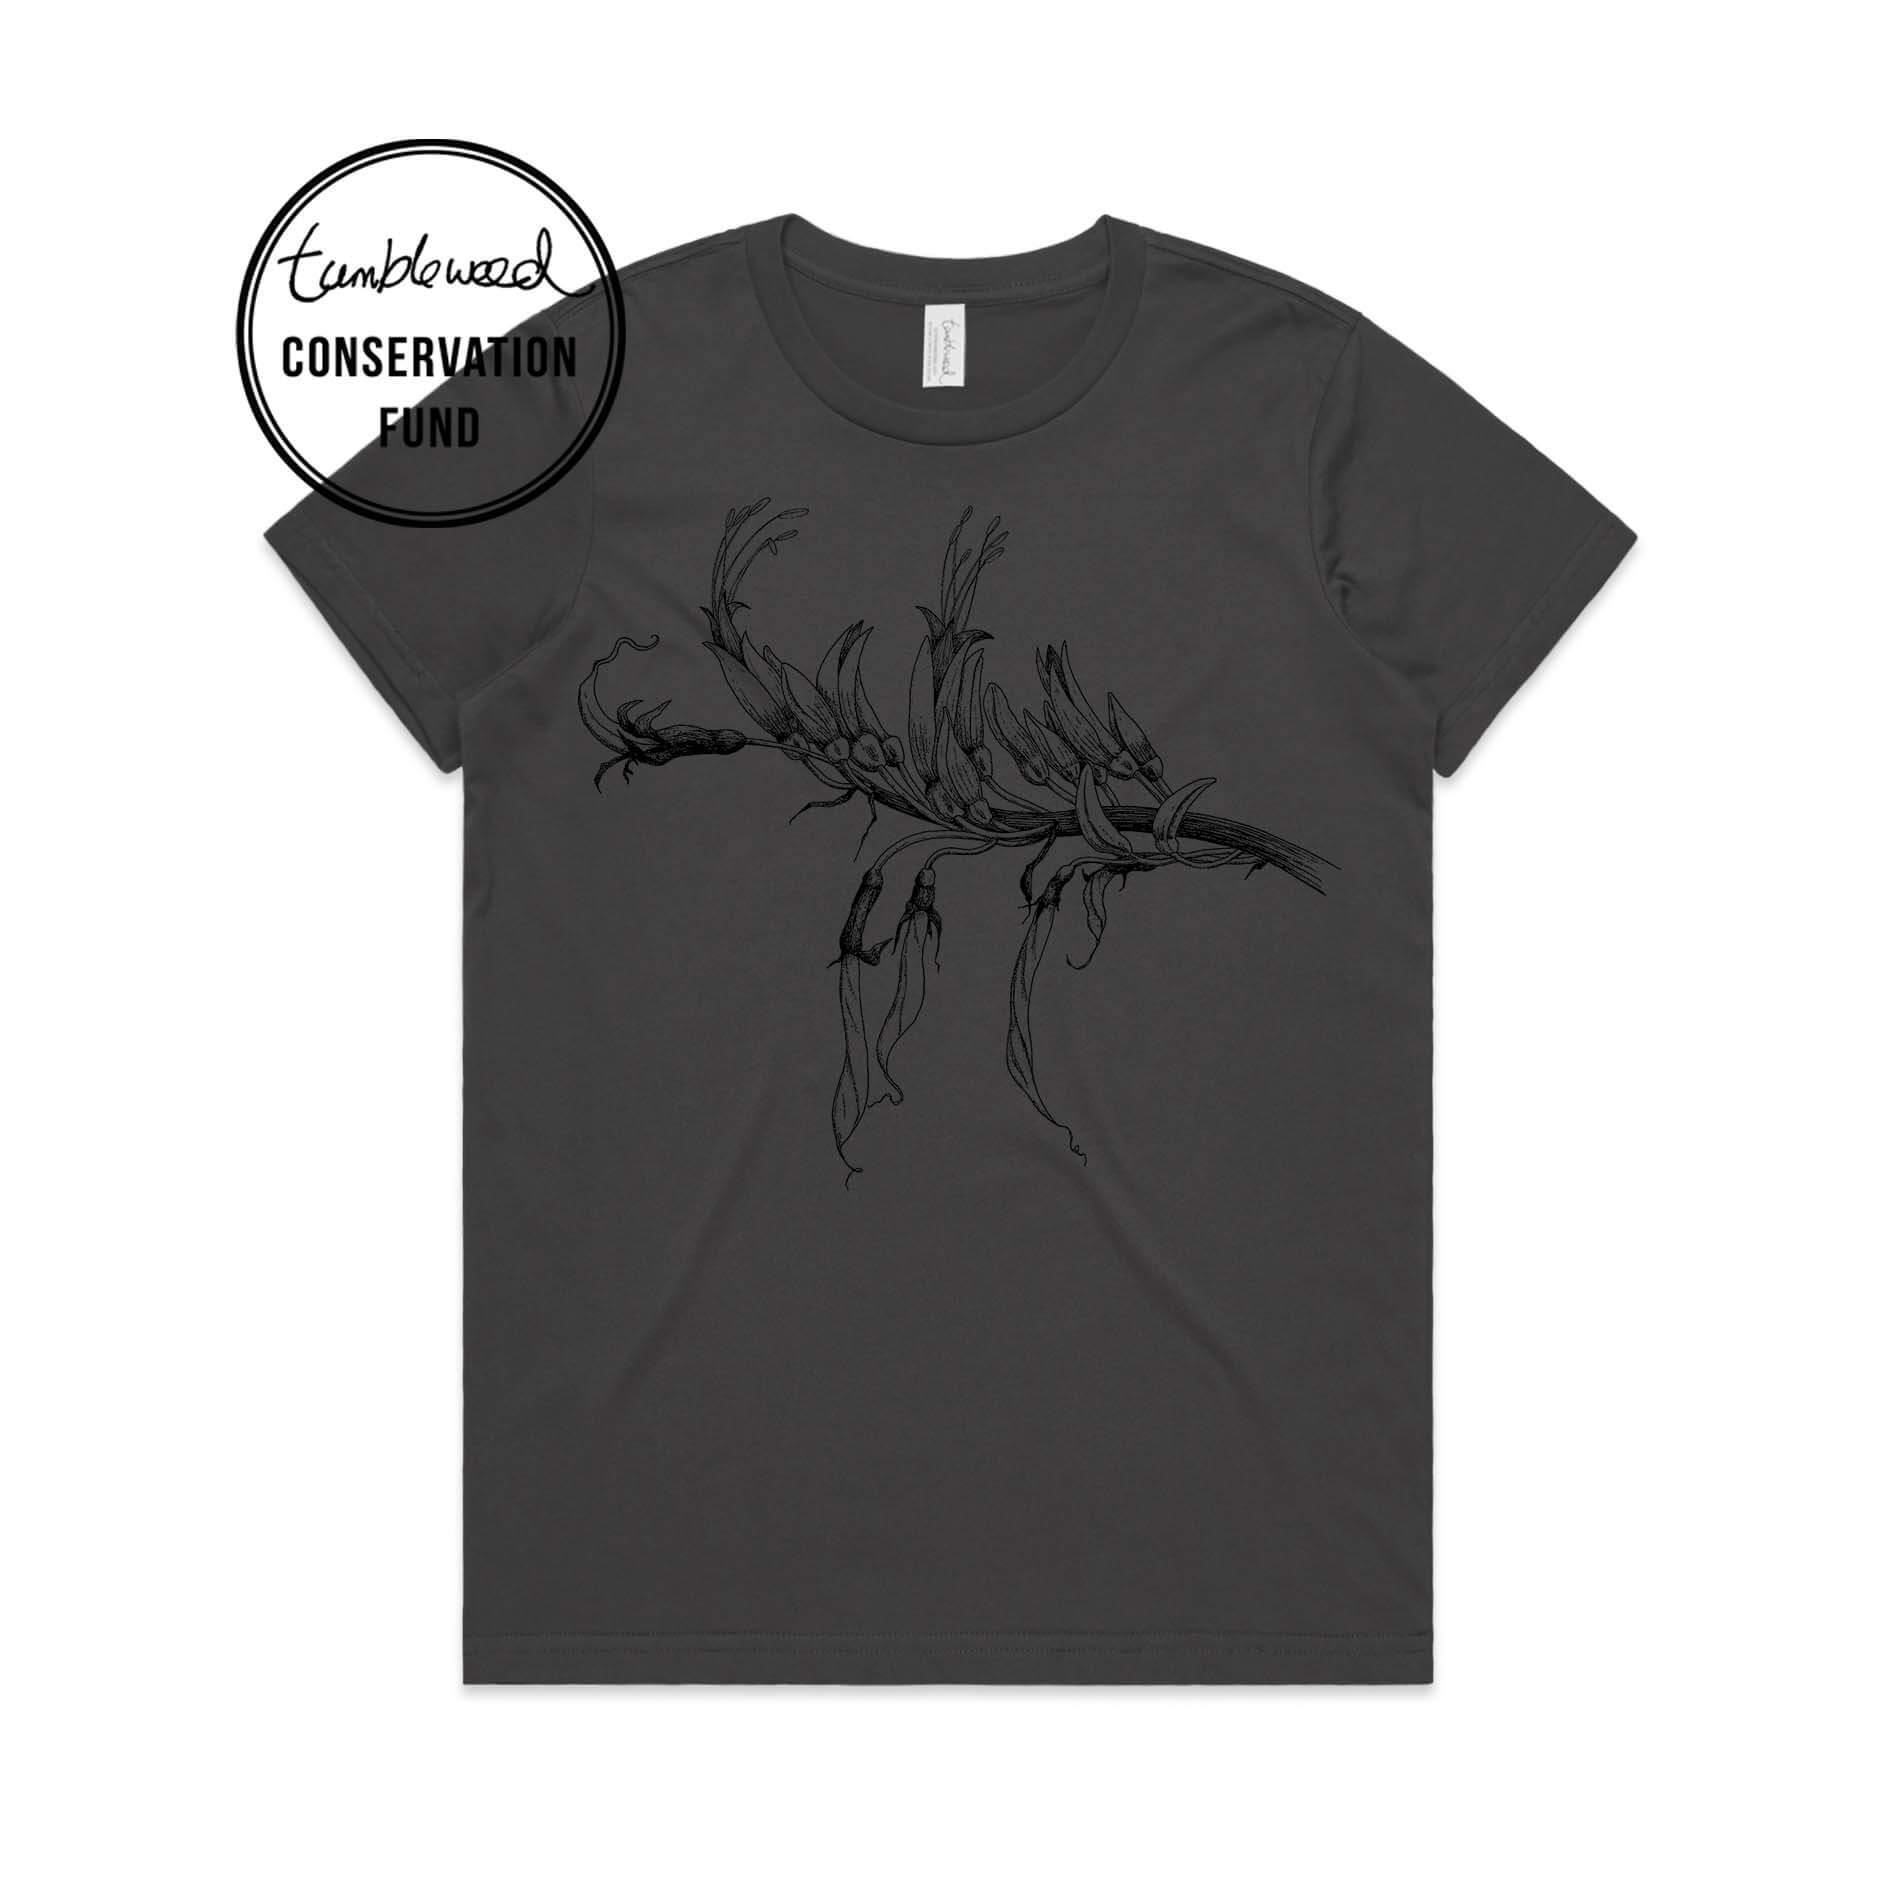 Charcoal, female t-shirt featuring a screen printed Mountain Flax design.